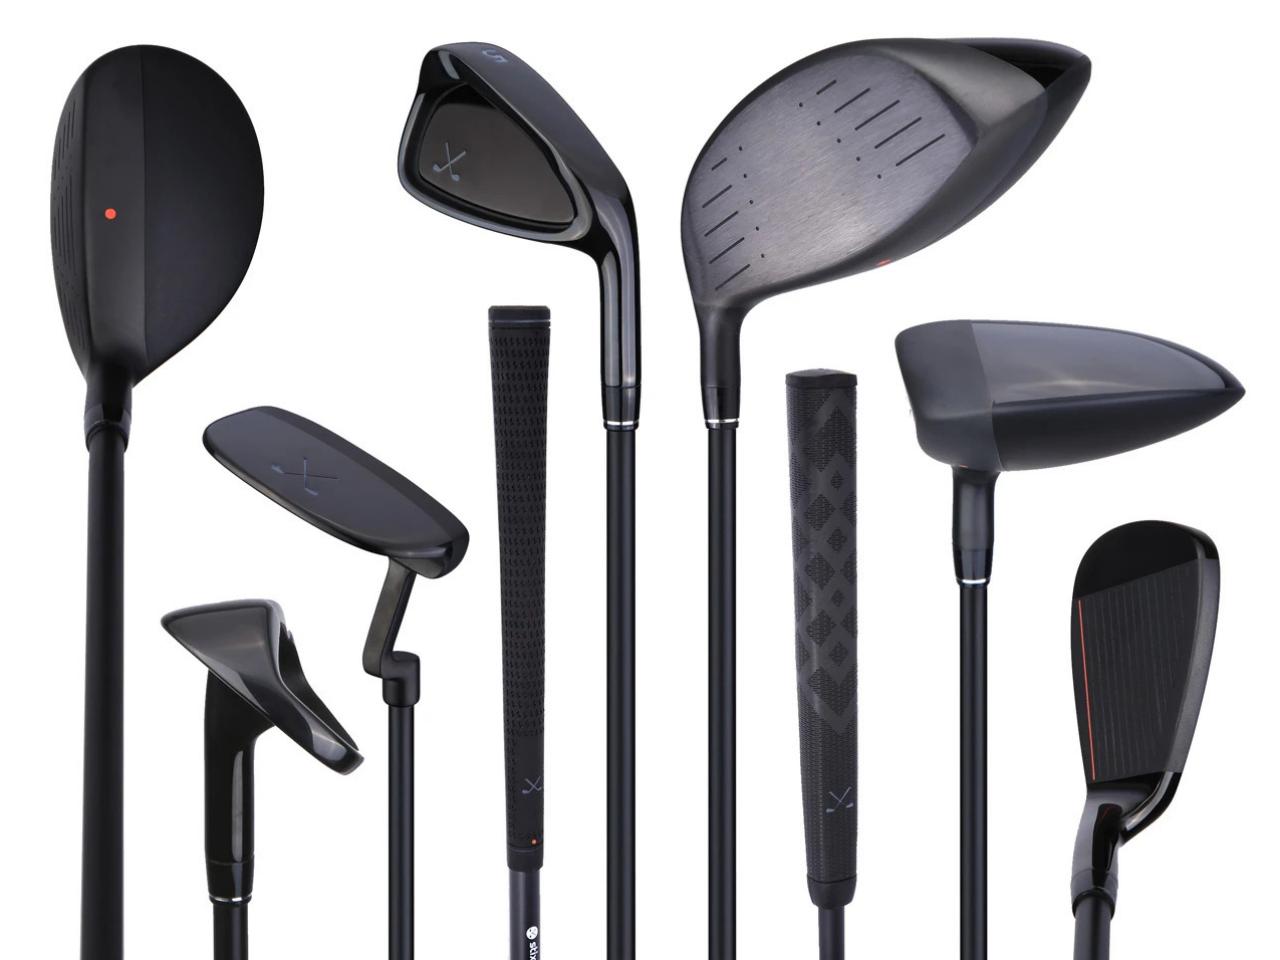 Stix Golf thinks clubs need to get simpler for broader appeal—hence its  $800 12-piece set | Golf Equipment: Clubs, Balls, Bags | GolfDigest.com